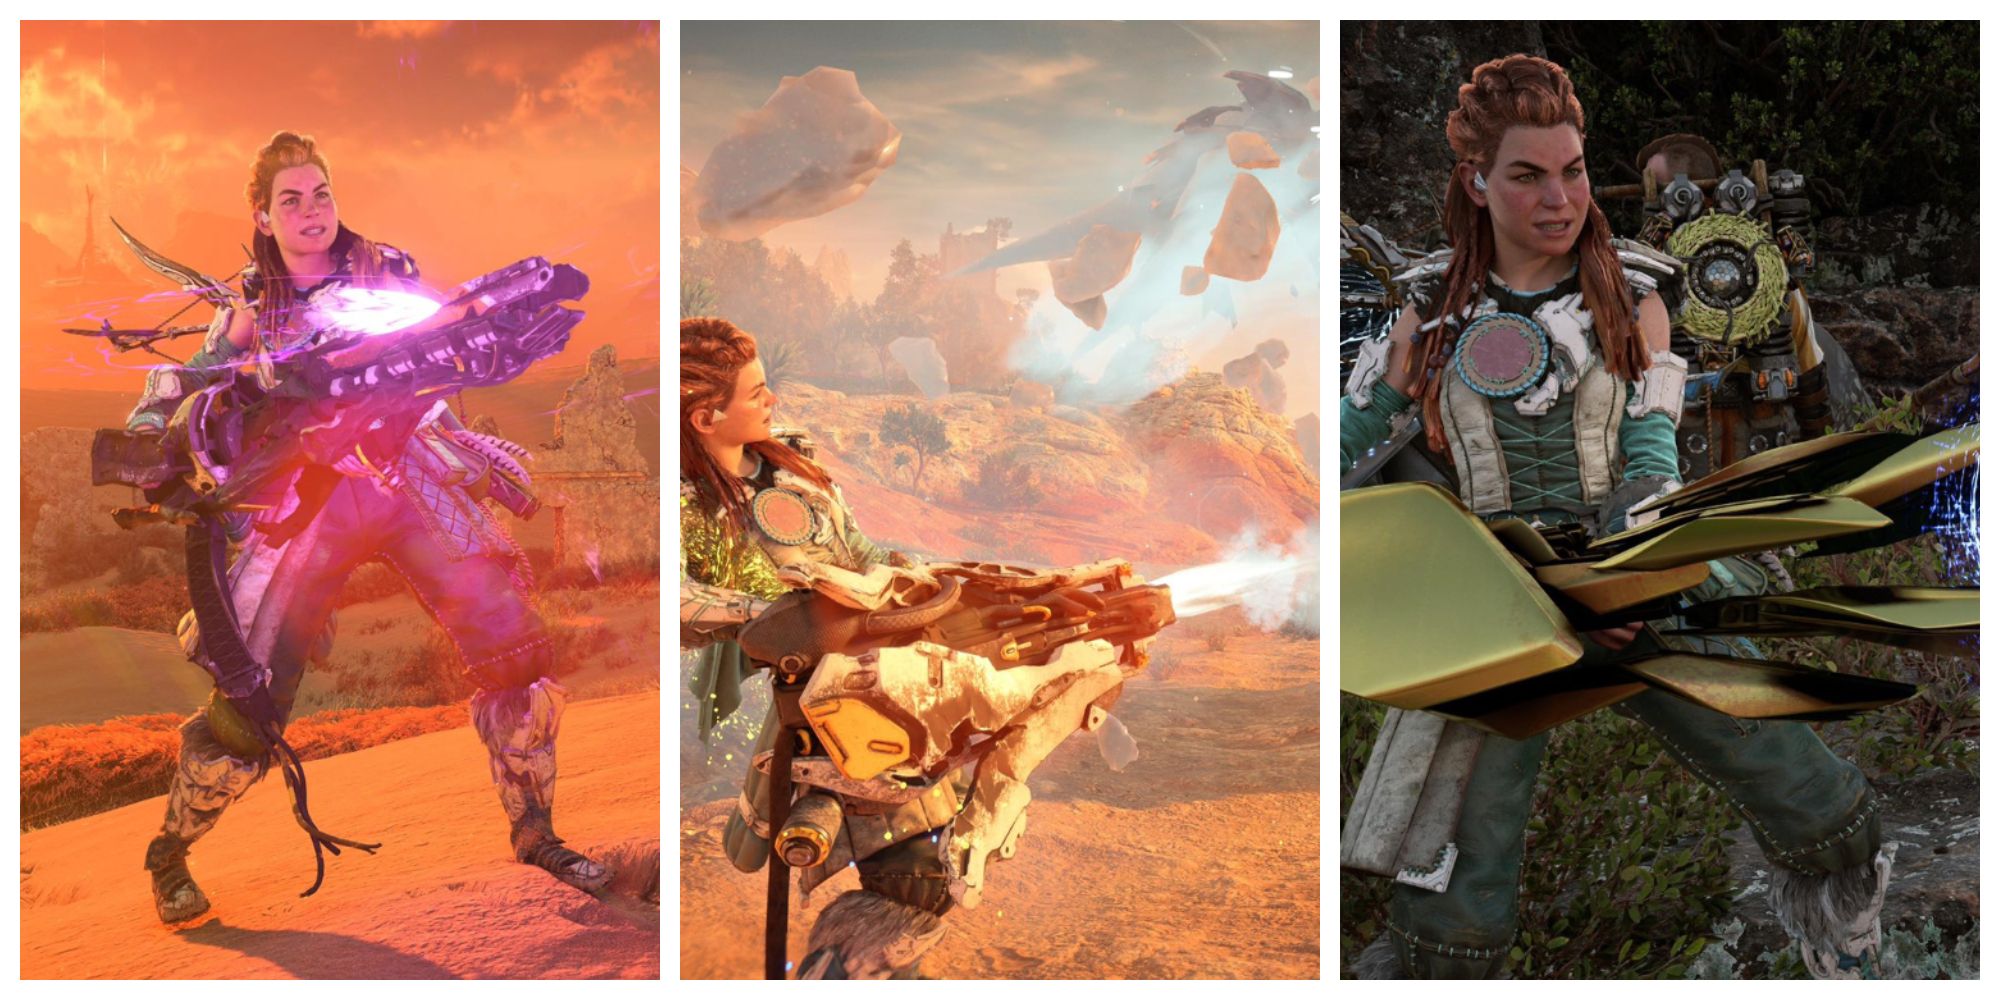 Aloy holding a glowing purple gun in the desert; aloy firing a large gun thats shooting out a light blue mist; aloy in green and white armor holding an angular, golden gun 